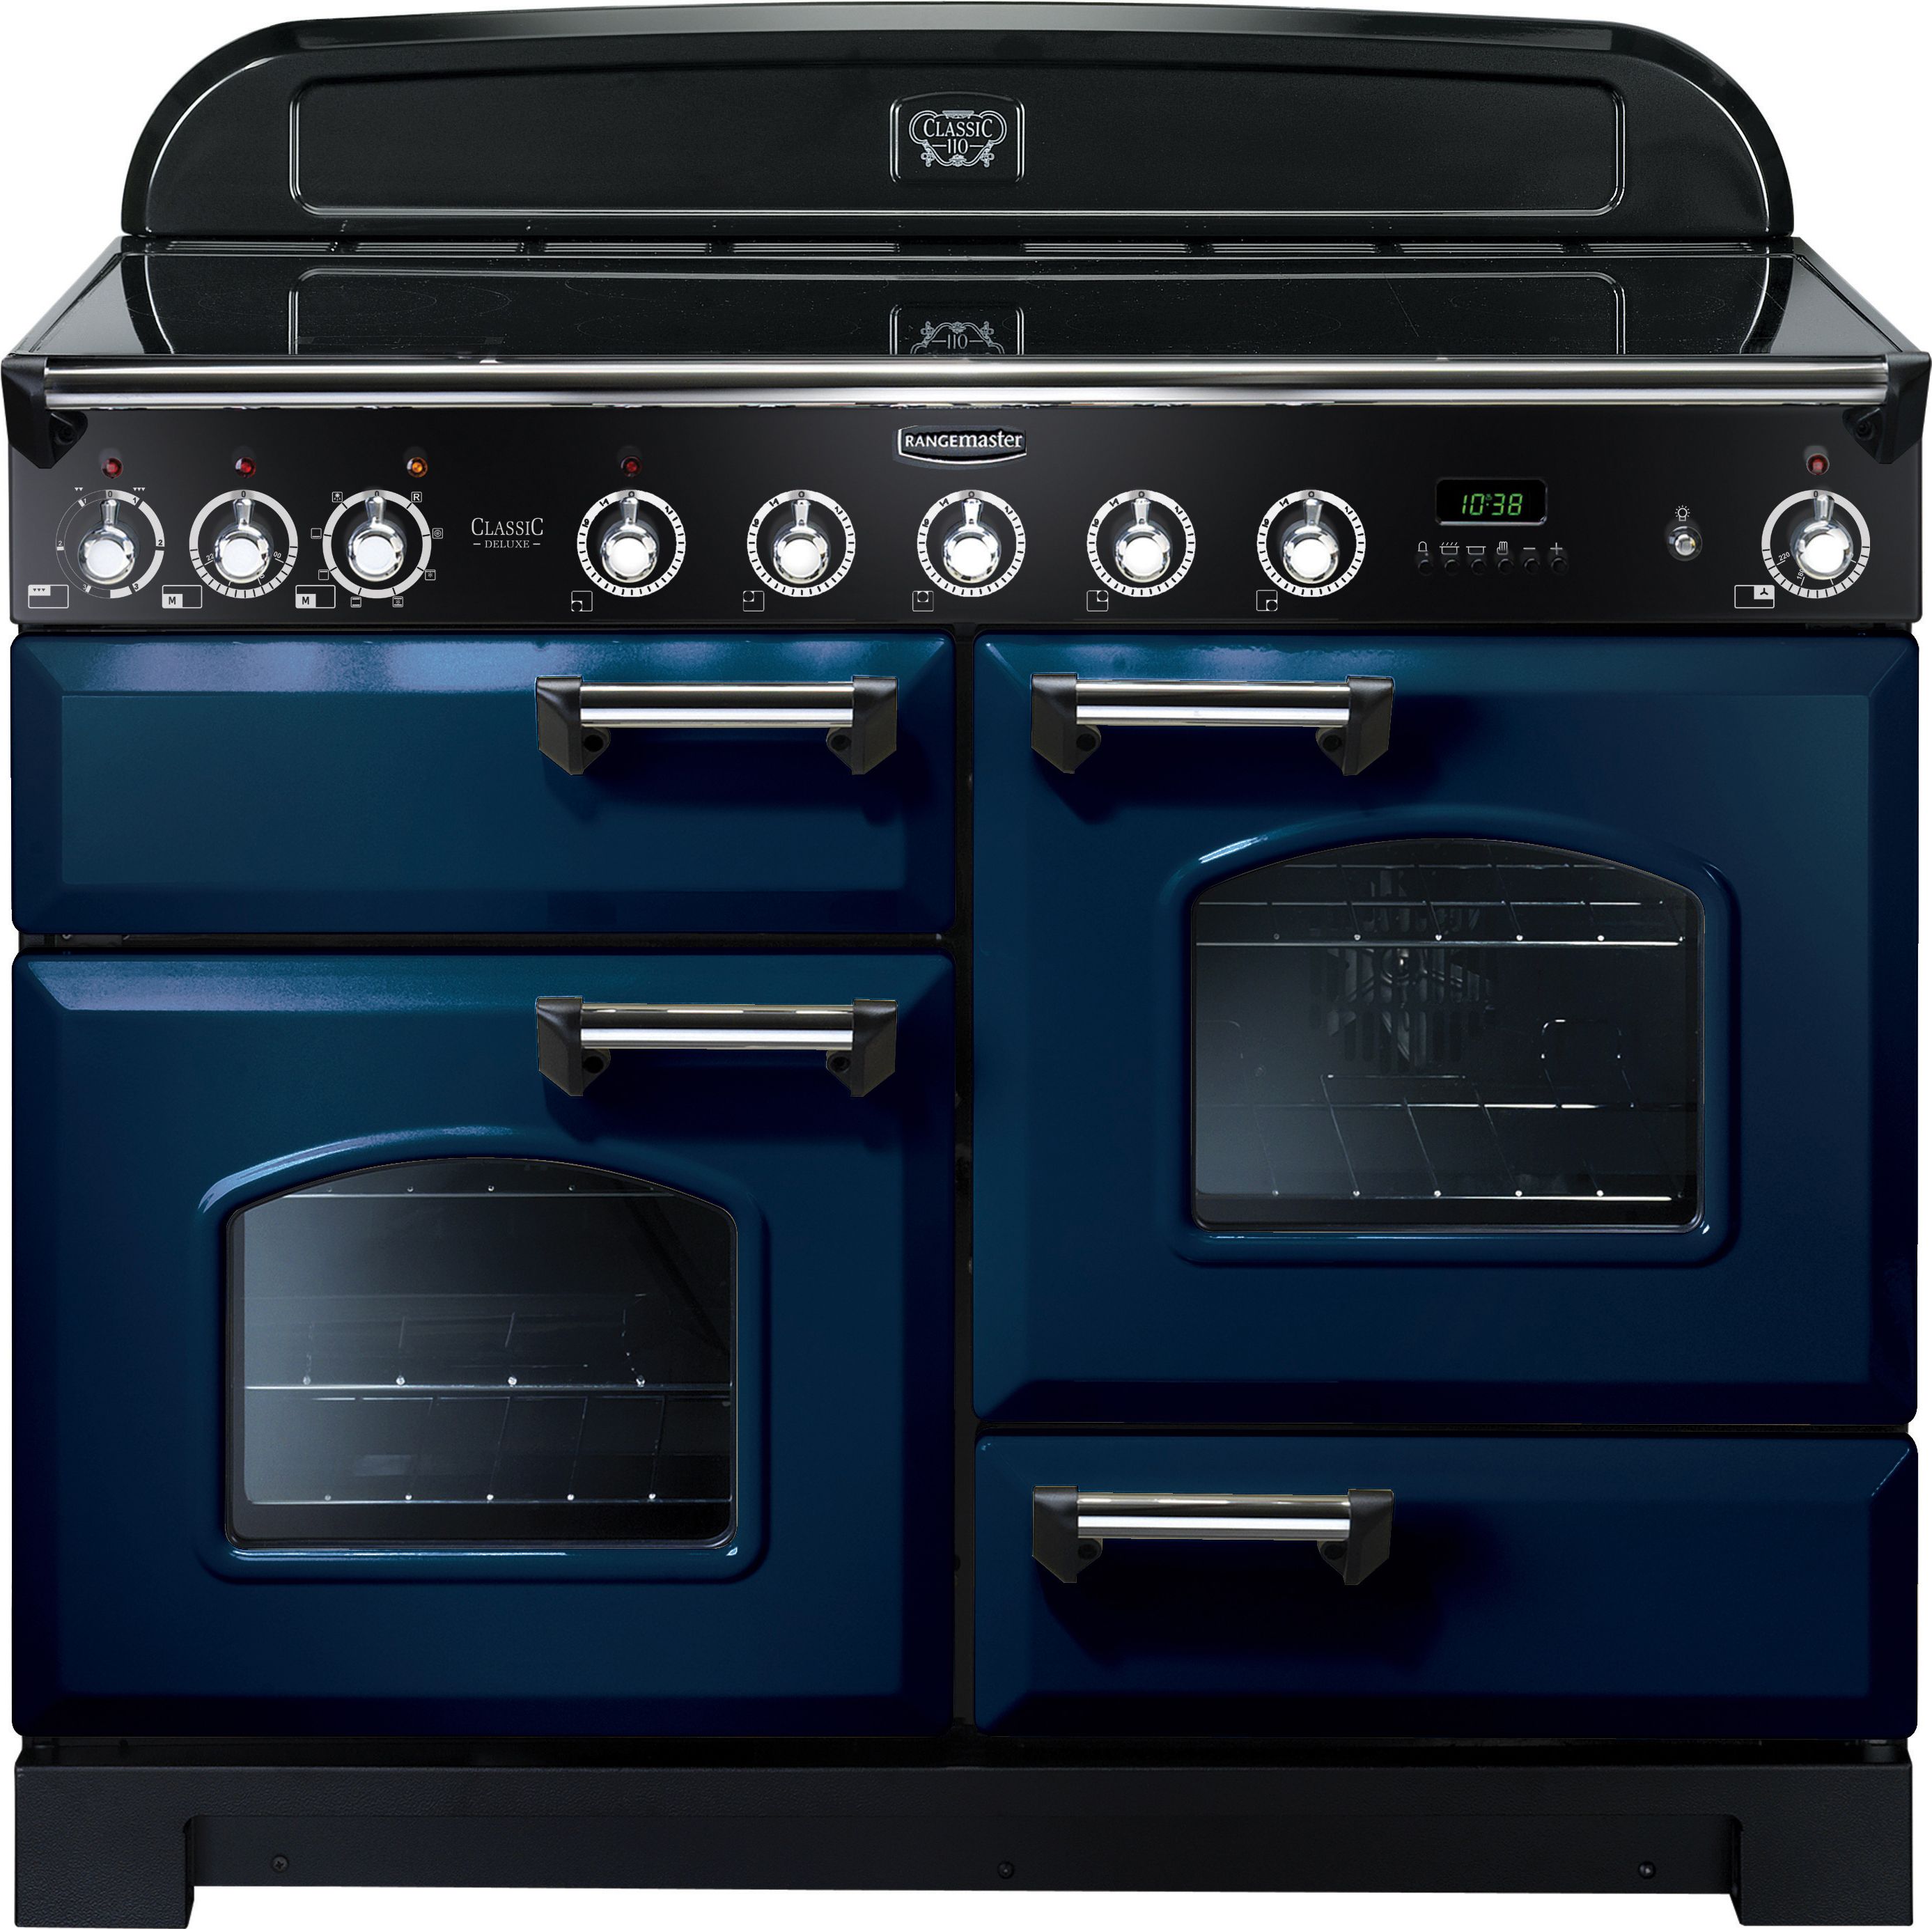 Rangemaster Classic Deluxe CDL110EIRB/C 110cm Electric Range Cooker with Induction Hob - Regal Blue / Chrome - A/A Rated, Blue